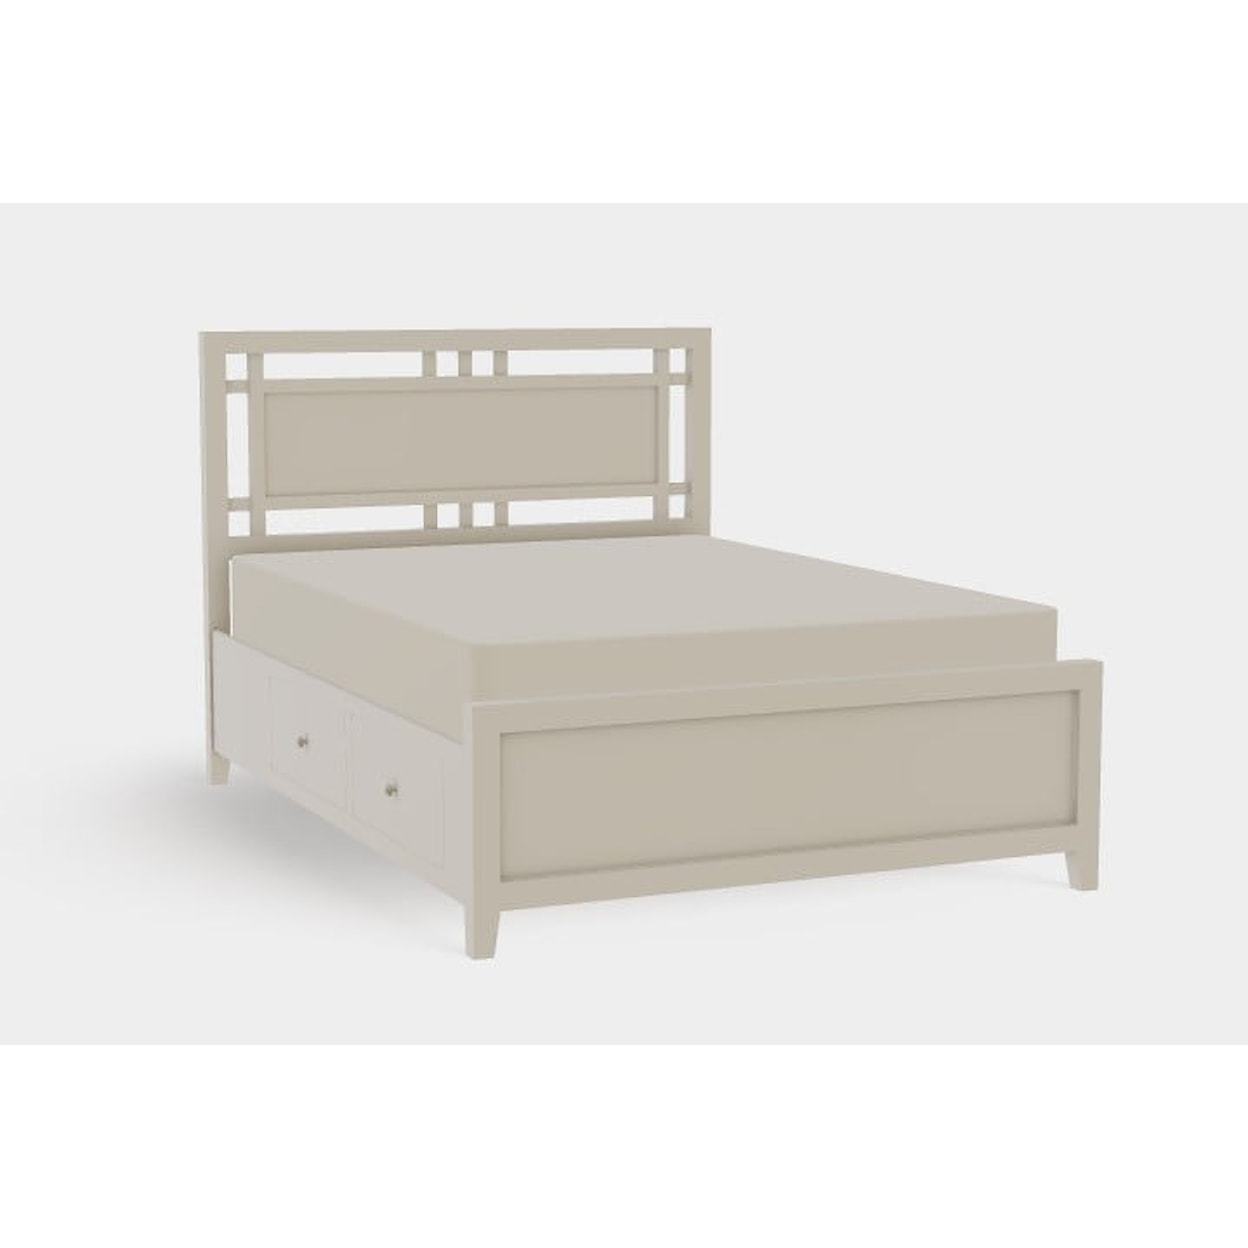 Mavin Atwood Group Atwood Queen Both Drawerside Gridwork Bed